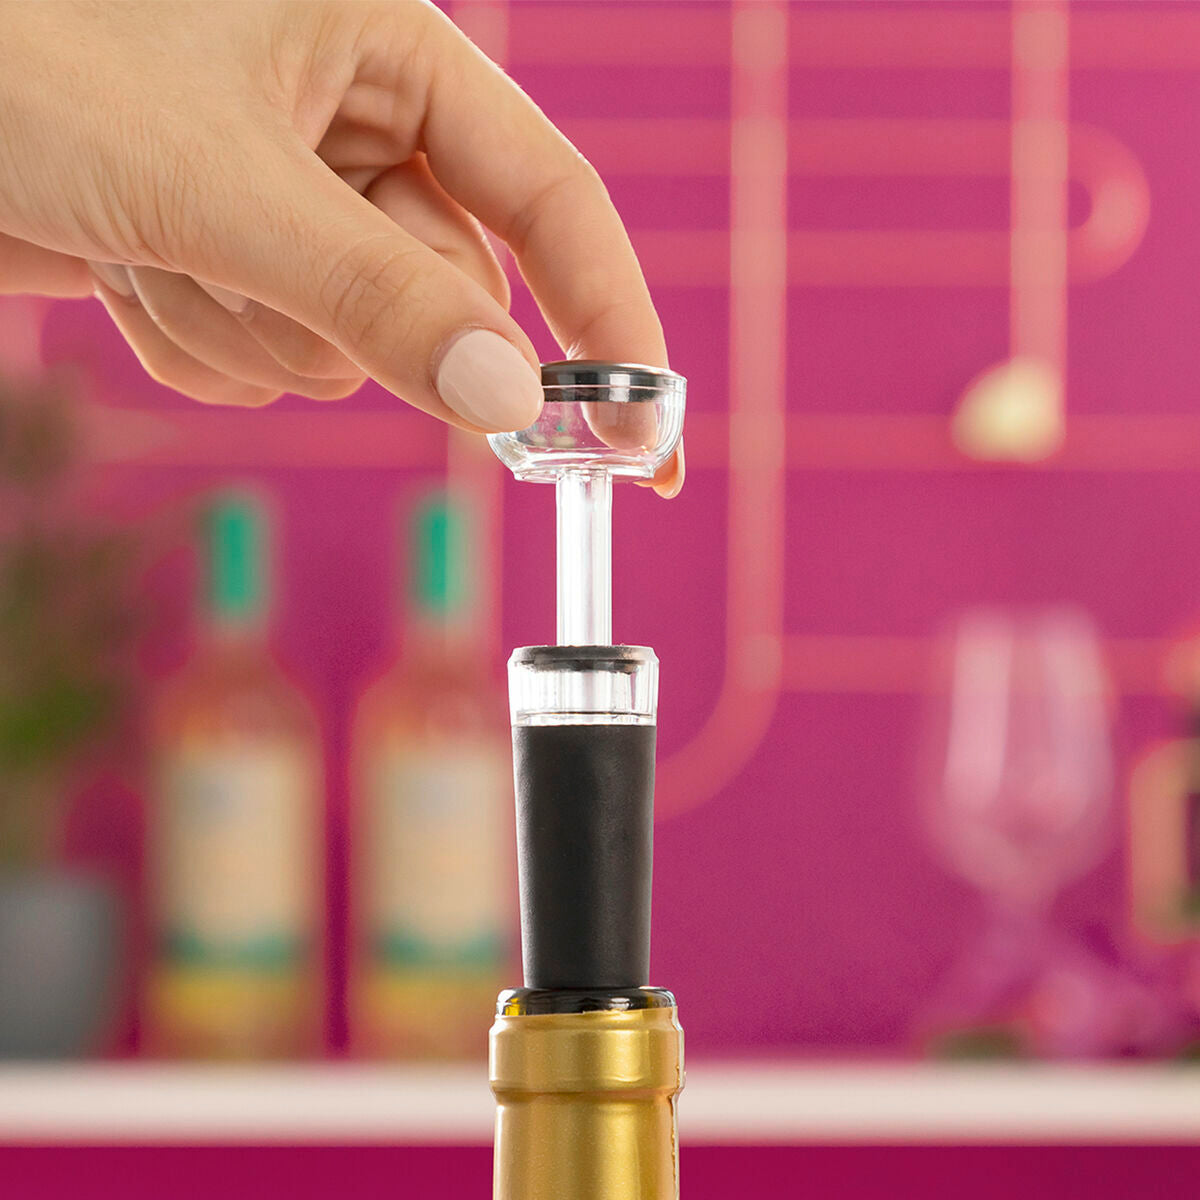 Rechargeable Electric Corkscrew with Accessories for Wine Corklux InnovaGoods (Refurbished B)